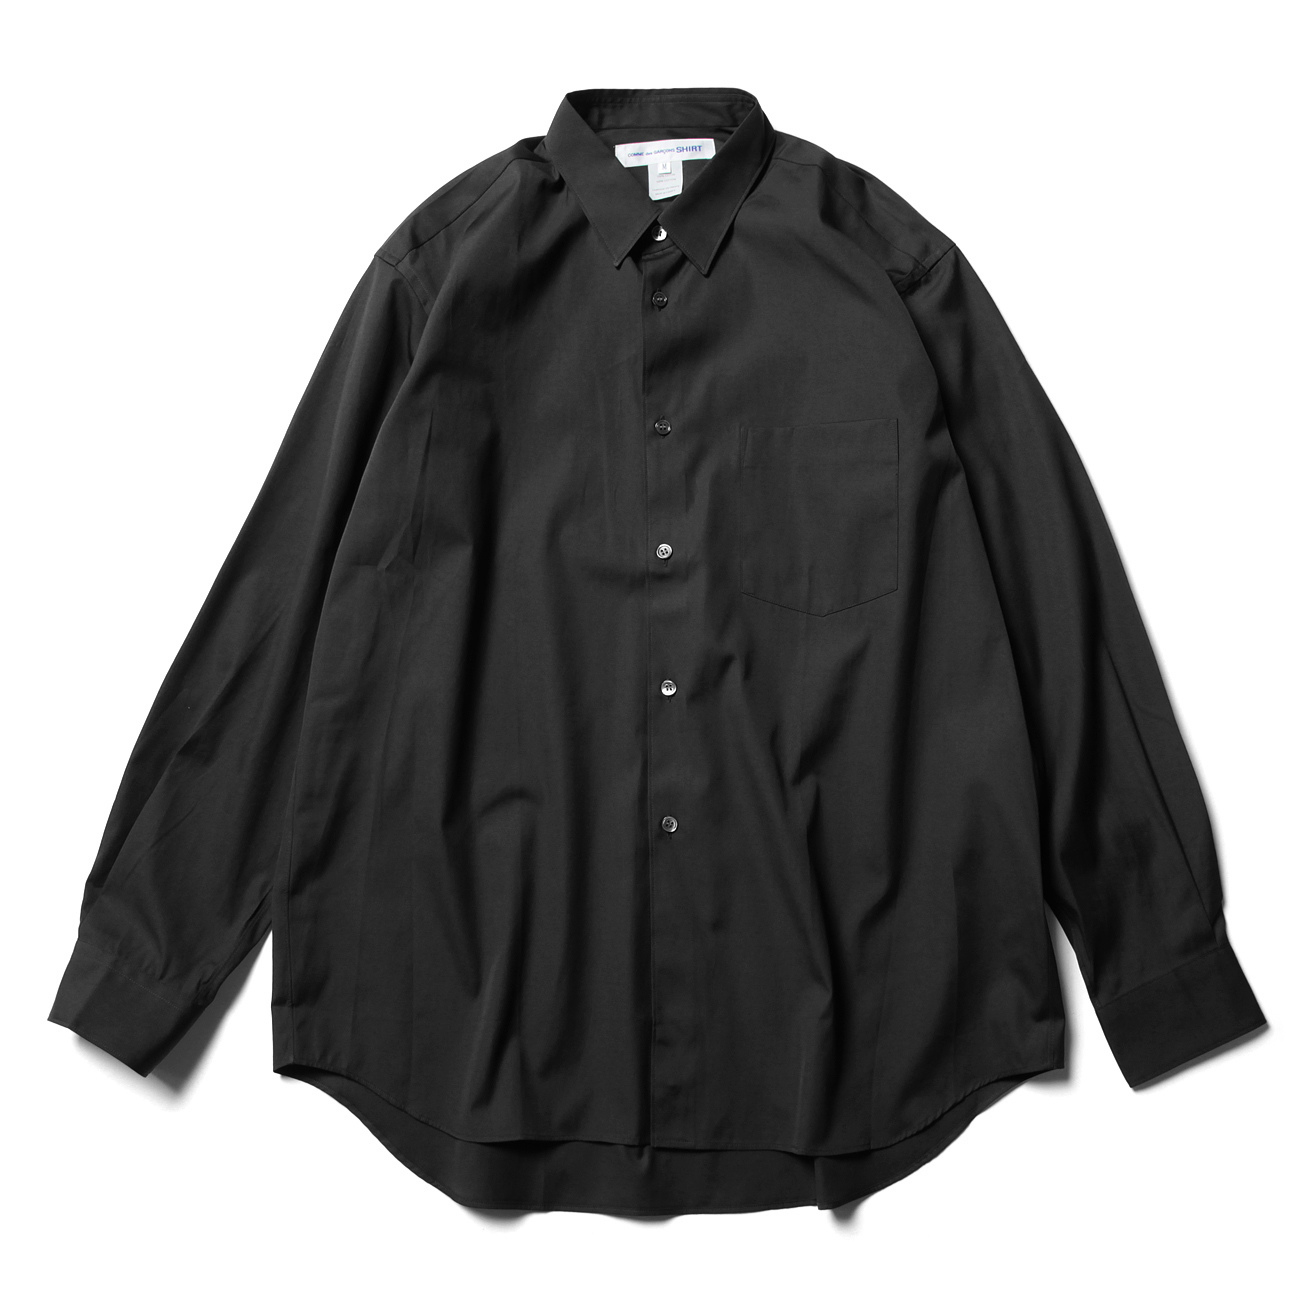 BLACK COMME des GARCONSのシャツです。